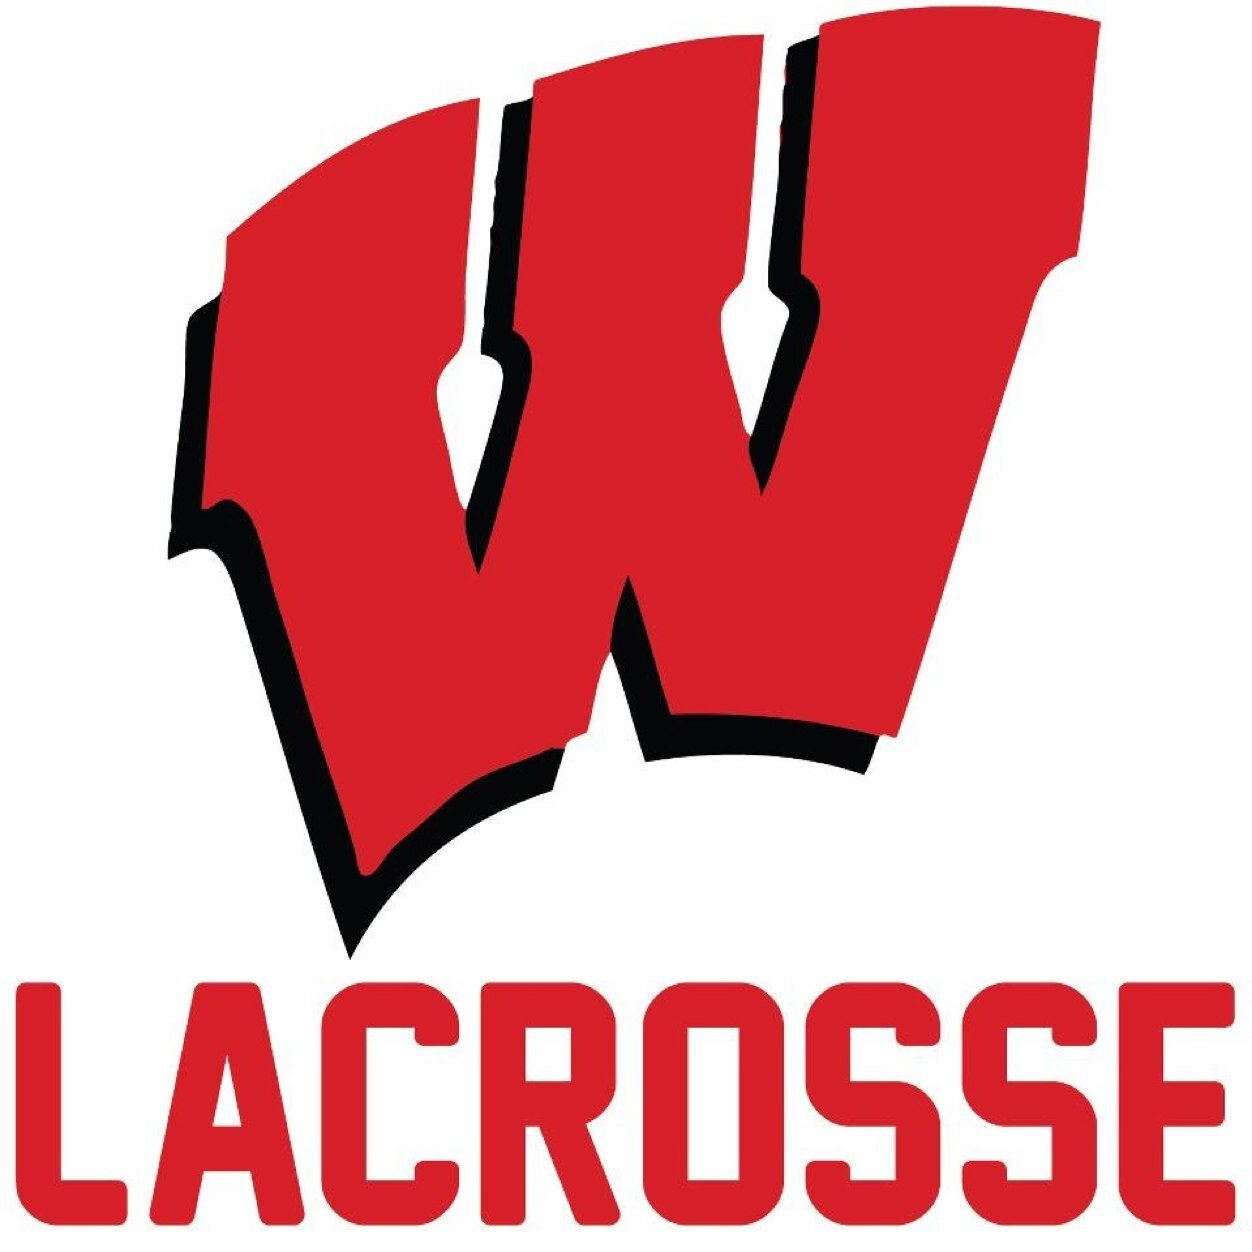 The official Twitter account of the University of Wisconsin Men's Lacrosse Team http://t.co/hTw2qoEitY